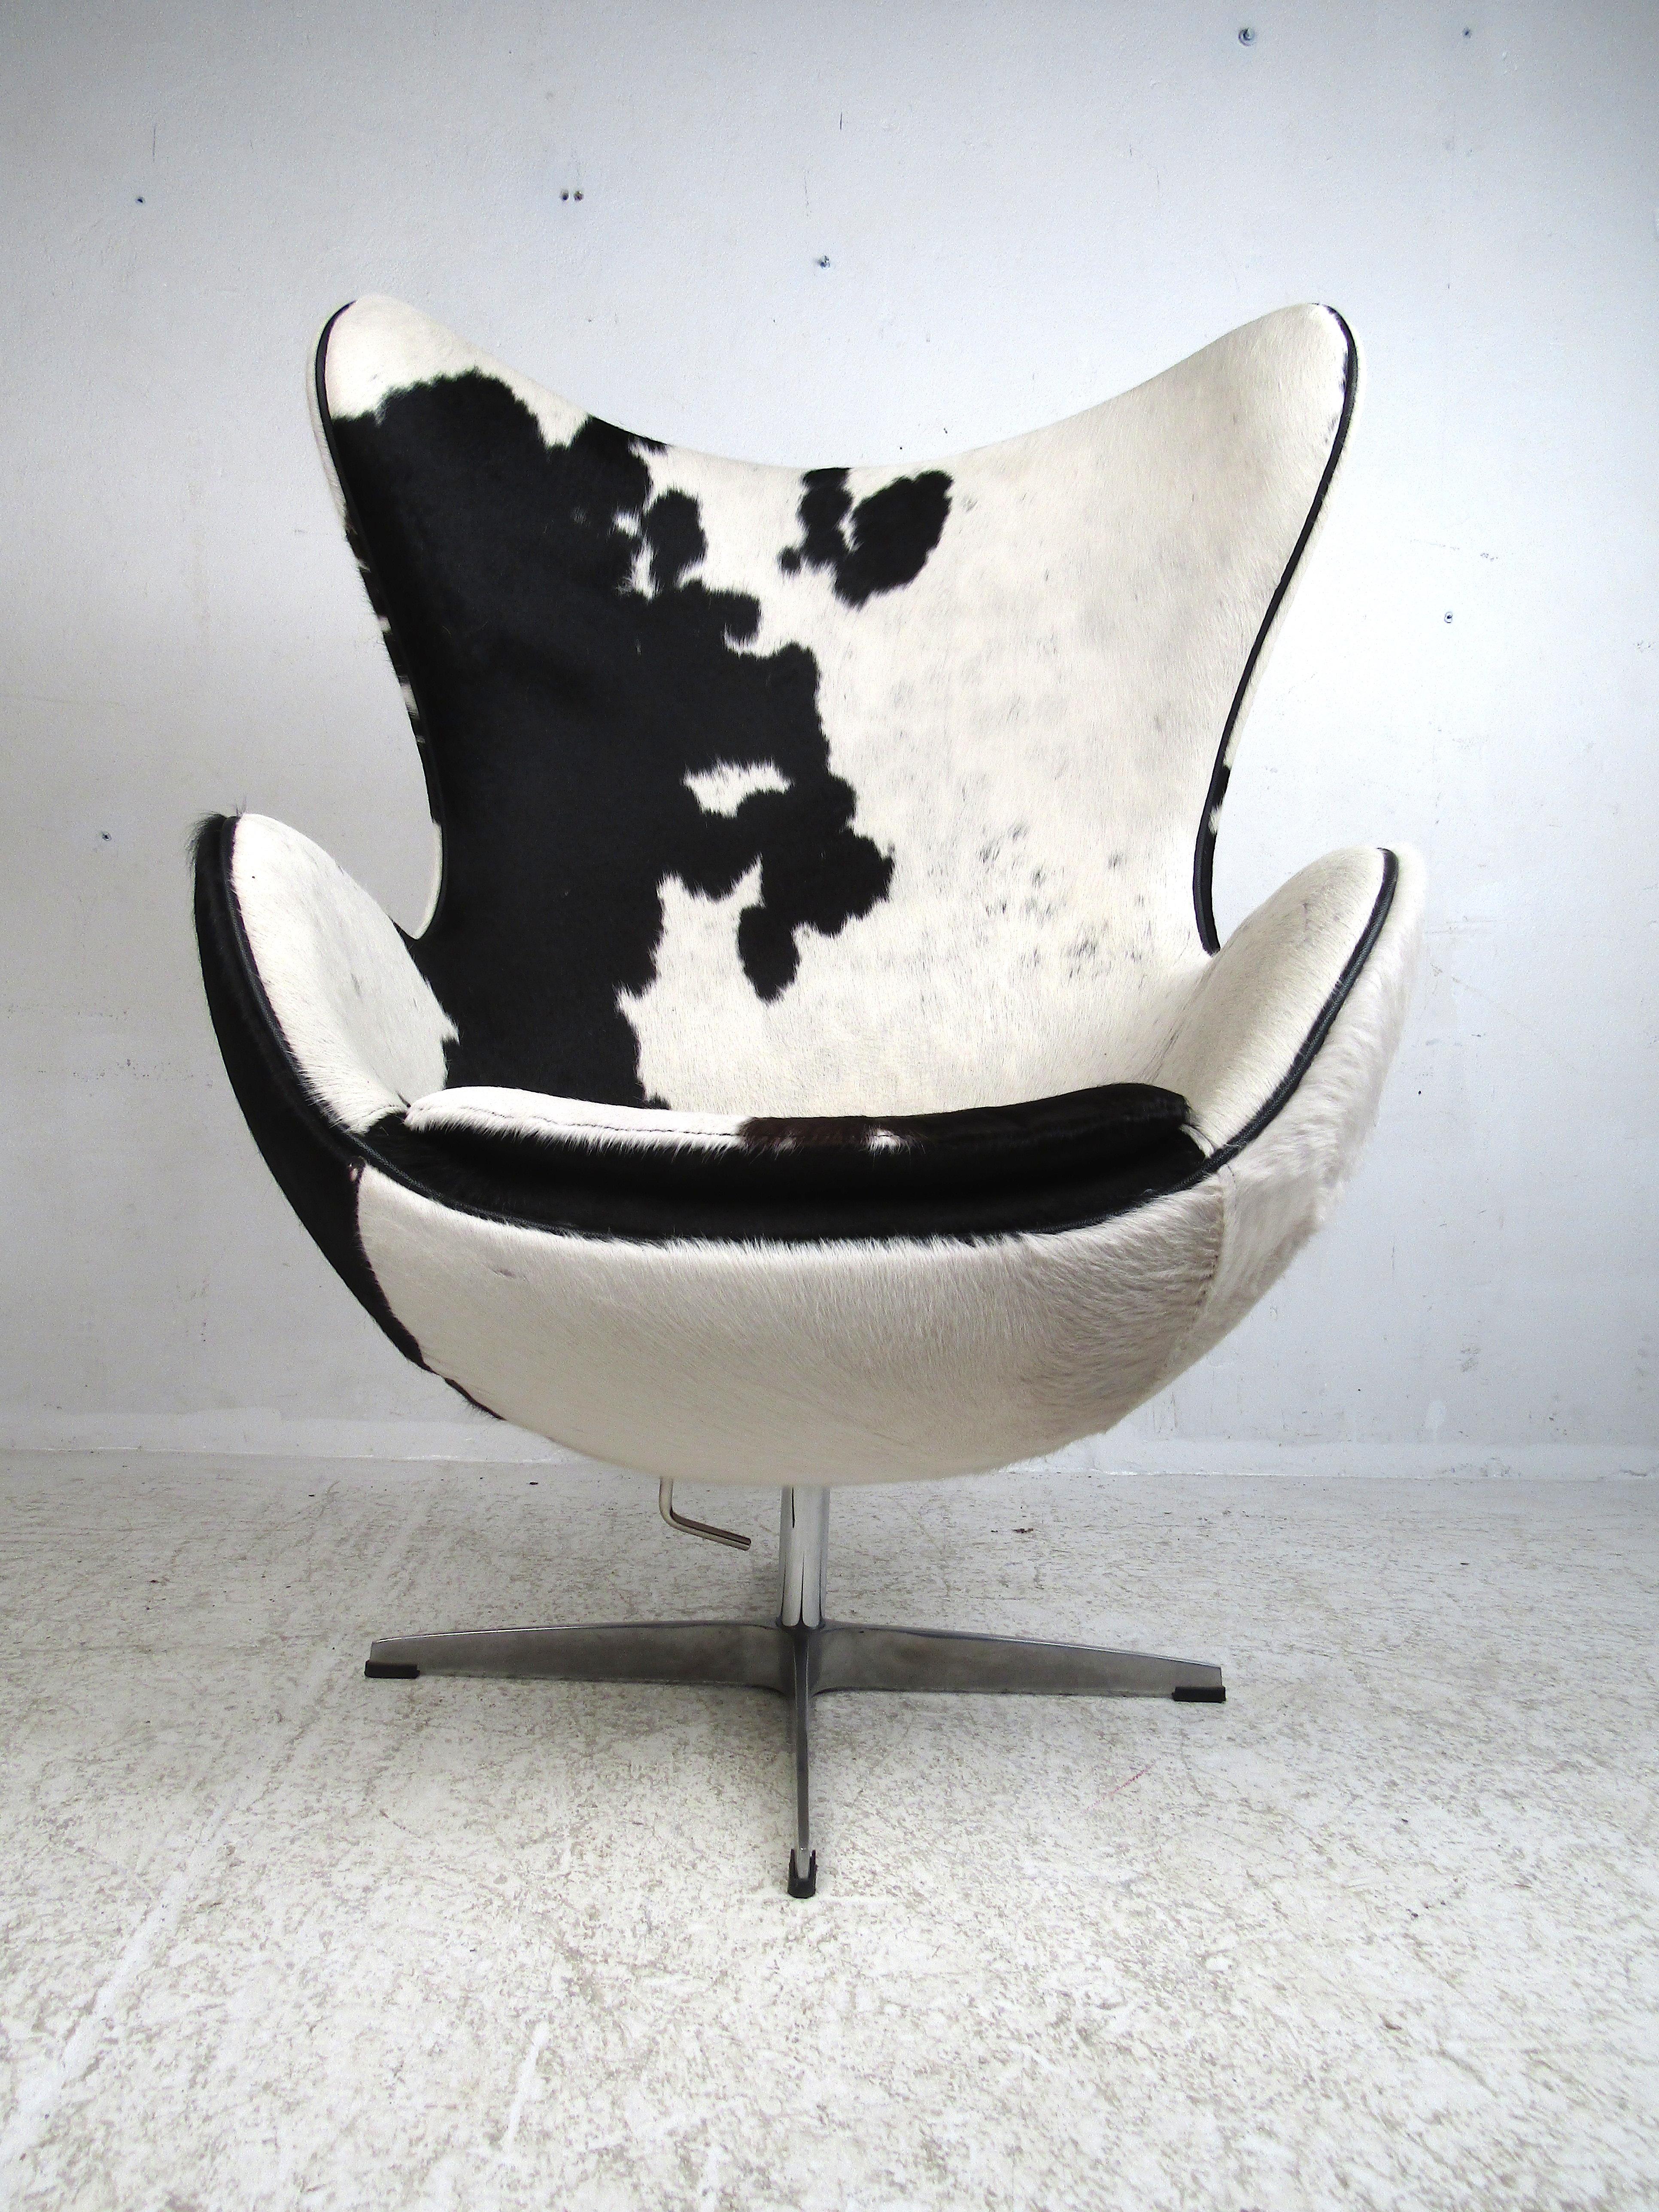 Danish modern cow-hide egg chair, famous design by Arne Jacobsen. Sturdy and comfortable chair. This piece is sure to make an impressive addition to any modern interior's seating arrangement. Please confirm item location with dealer (NJ or NY).